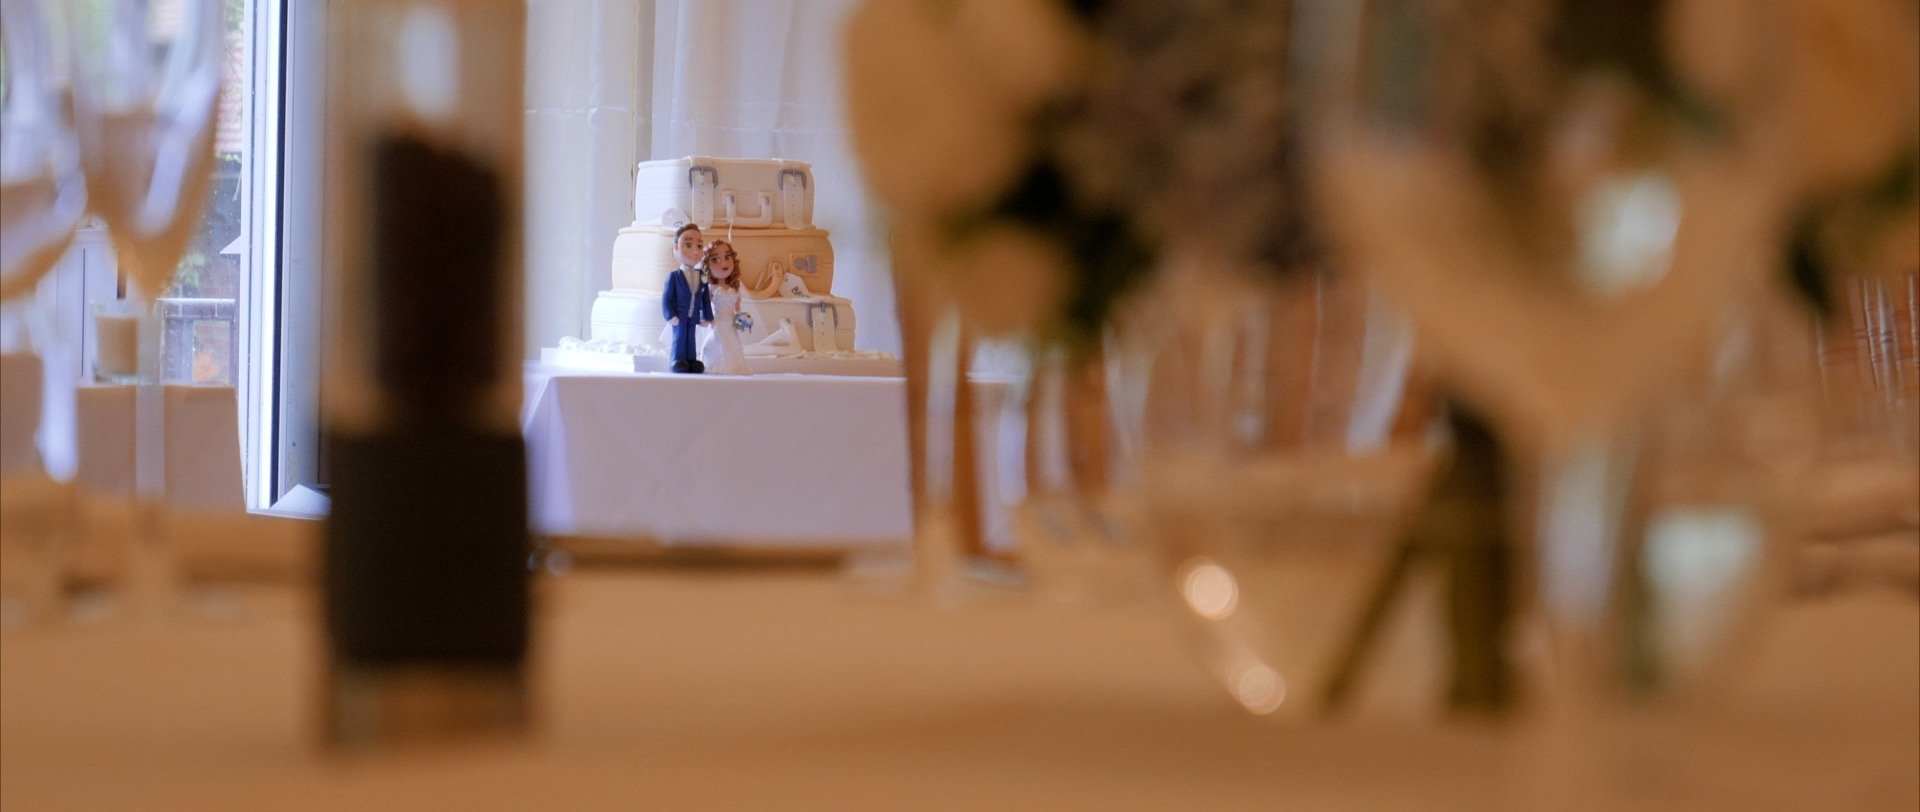 The wedding cake at Mulberry House Ongar.jpg